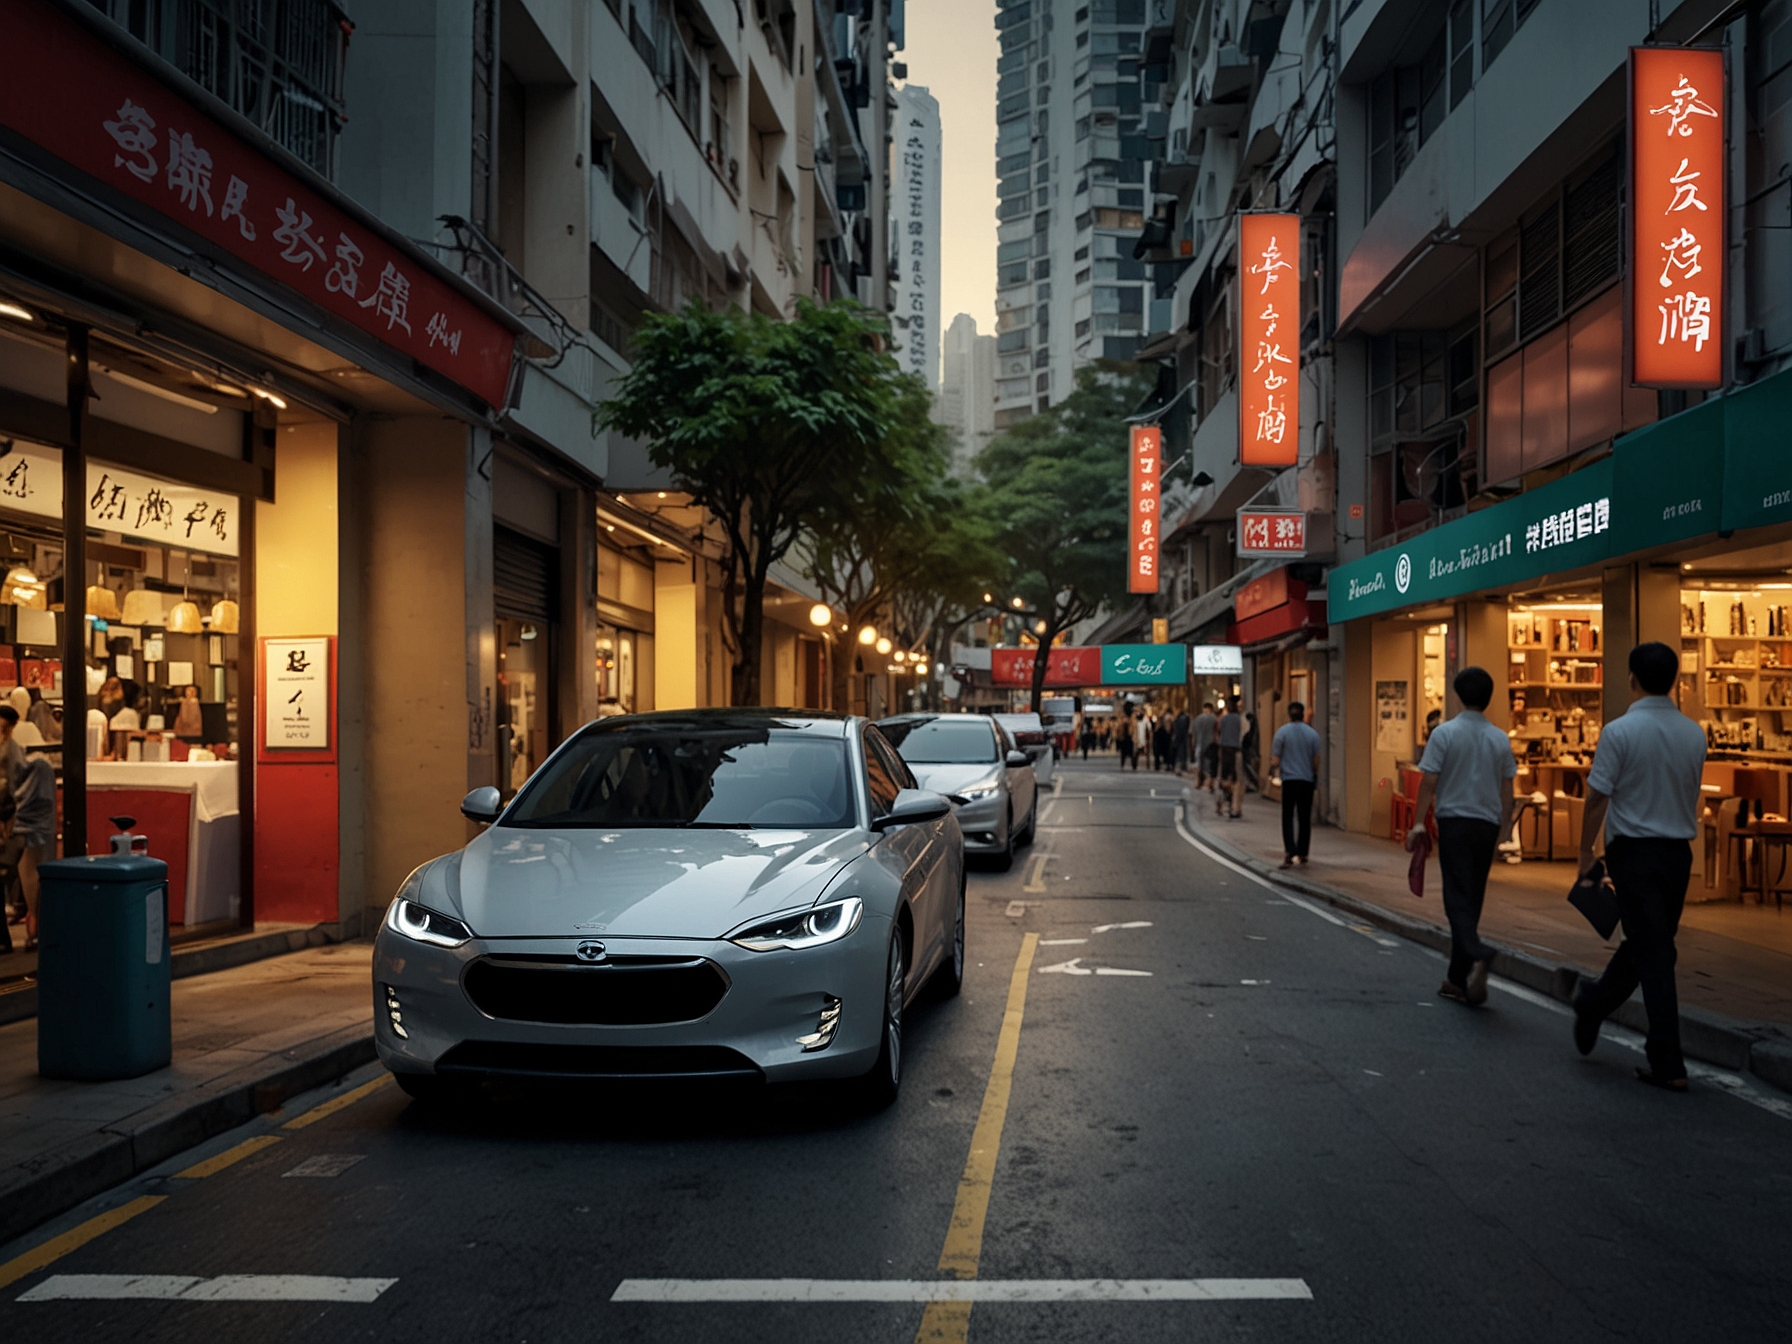 A bustling Hong Kong street with a Denza EV showroom prominently located, surrounded by cafes and shops, illustrating the economic and infrastructural growth spurred by the EV sector.